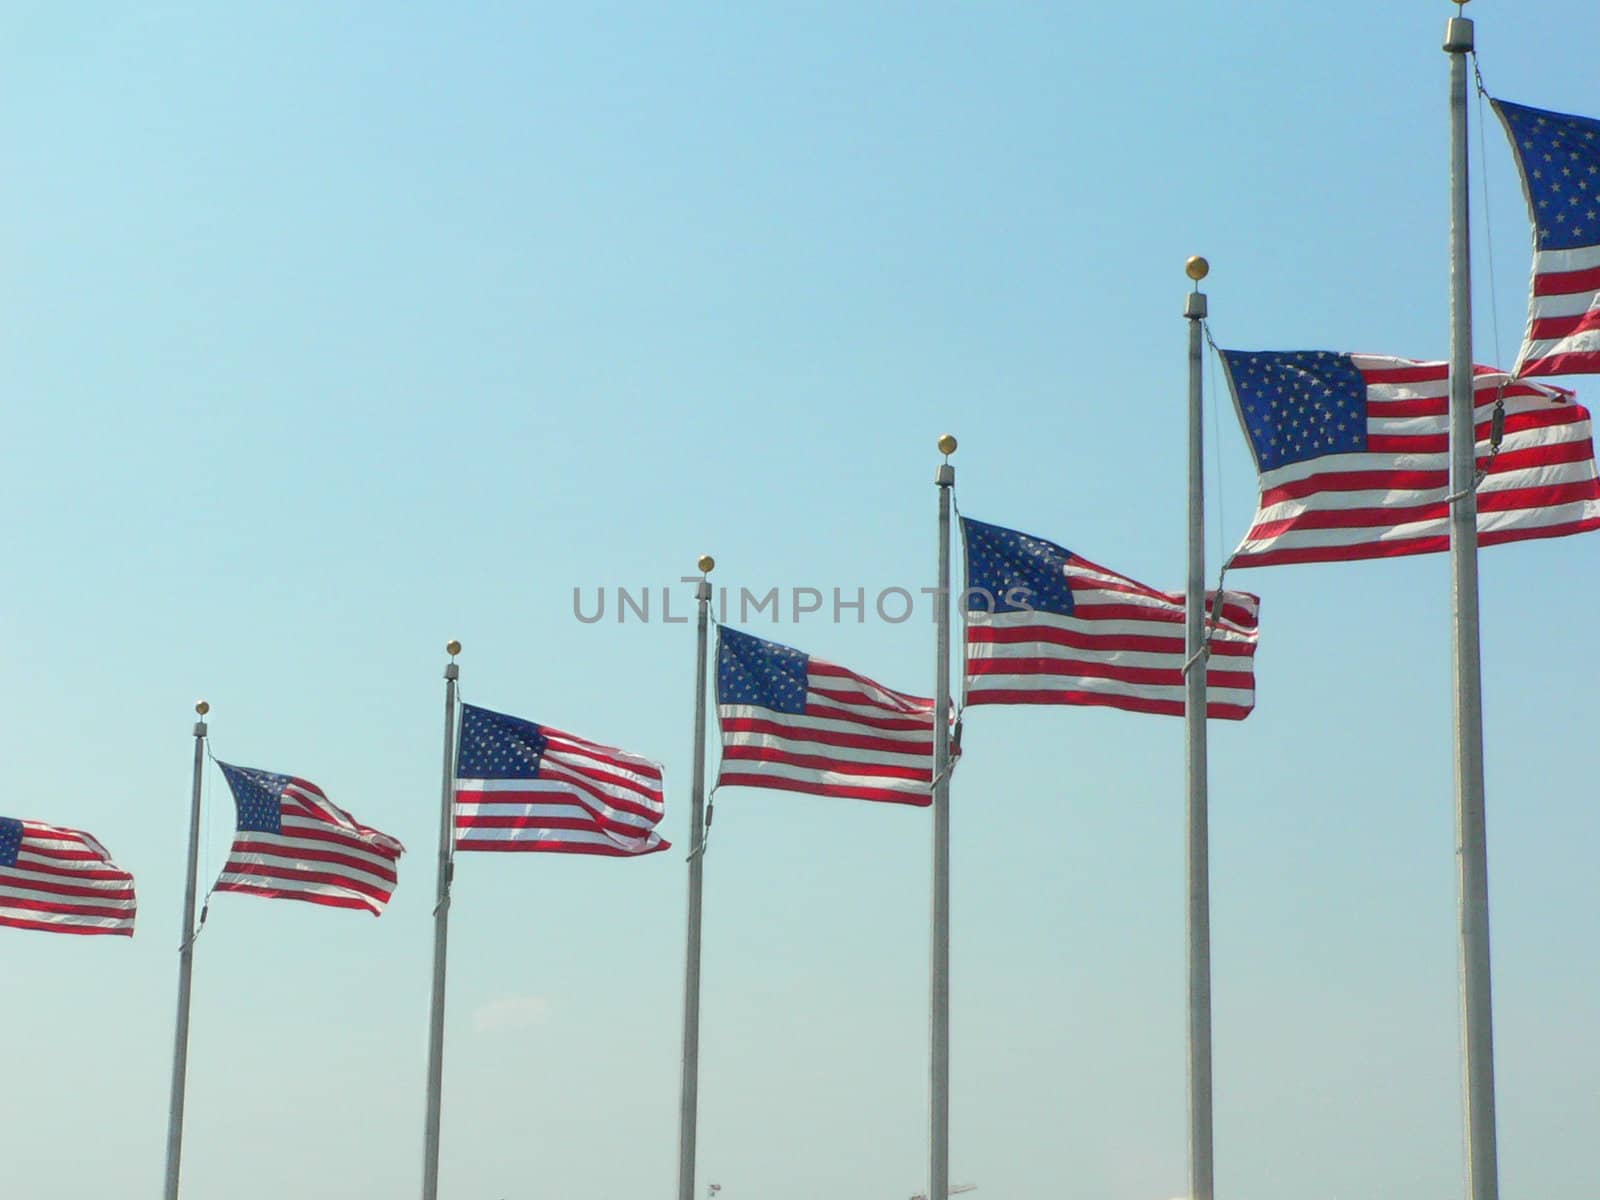 Several American flags in a row.